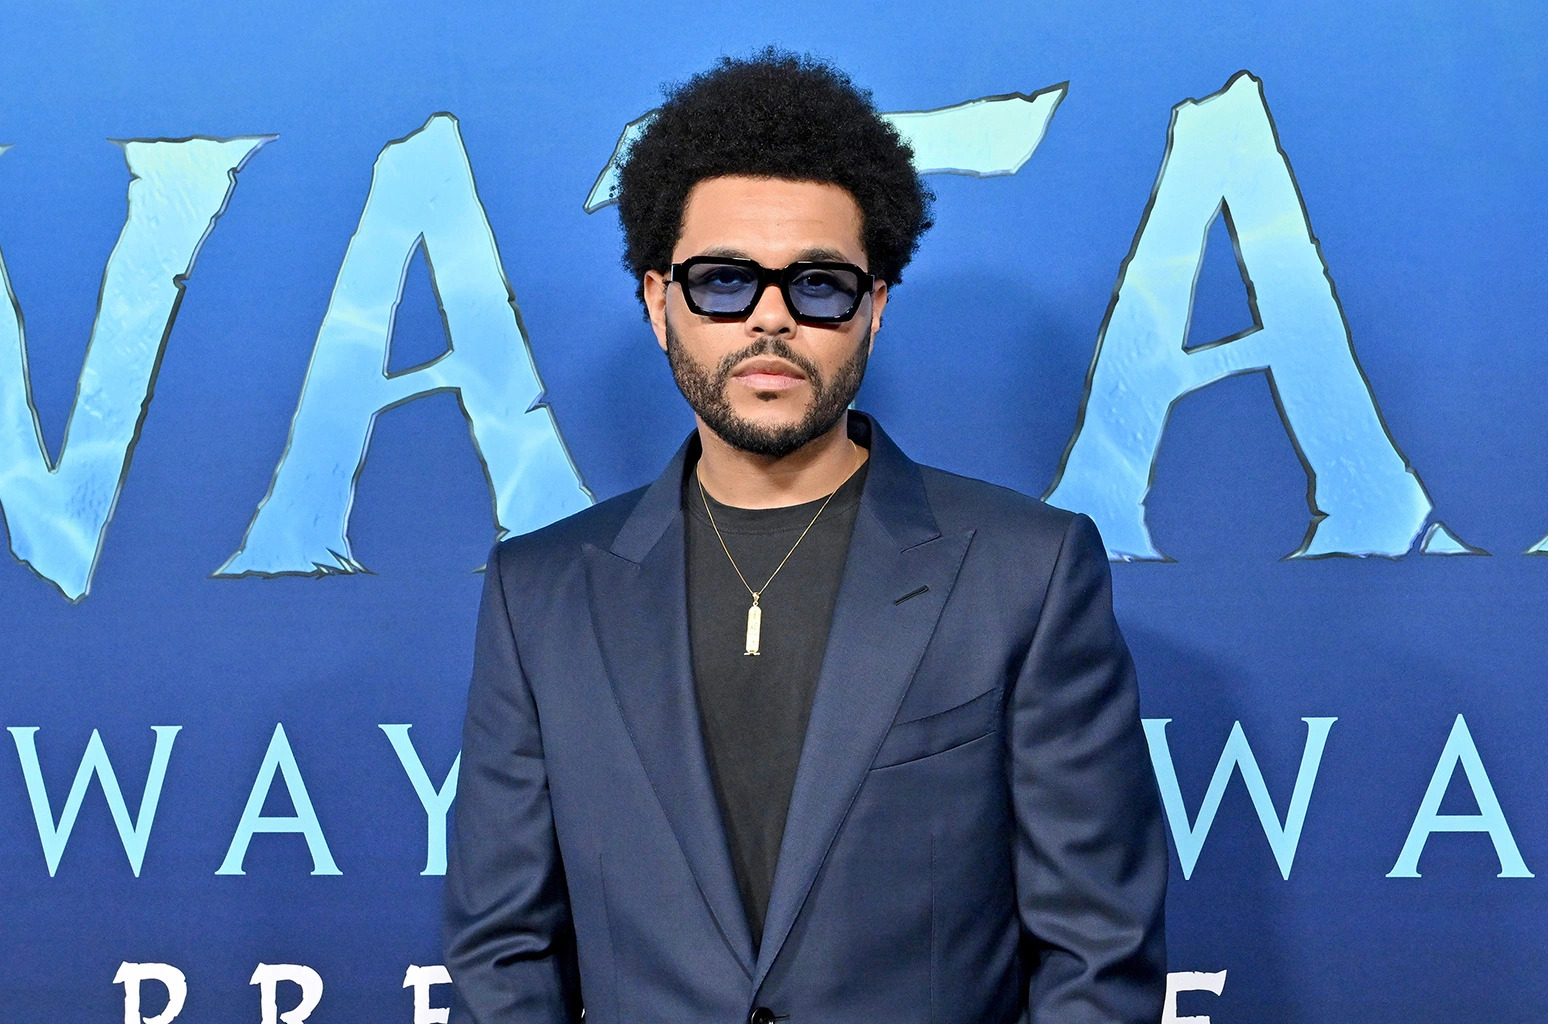 The Weeknd's 'Sacrifice' + More Trending New Hip-Hop/RnB Songs